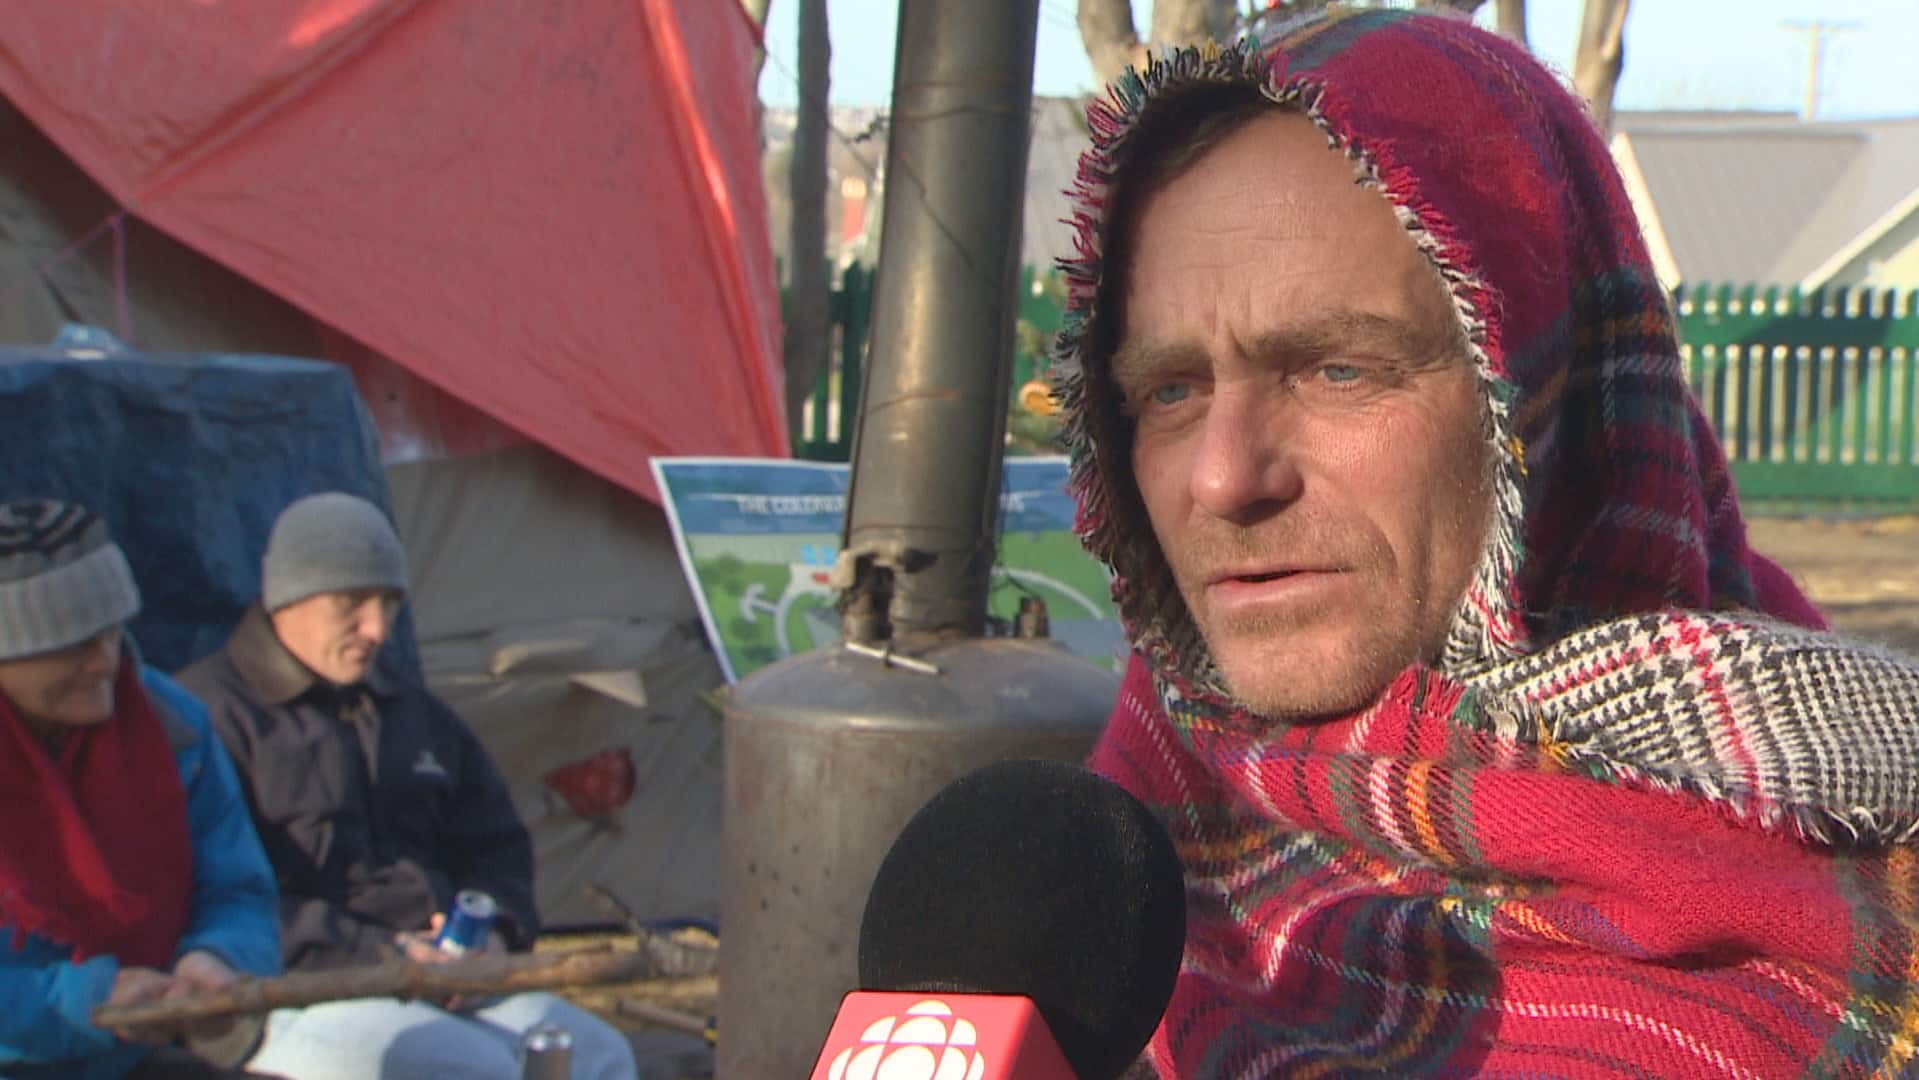 tent encampments prove exactly how broken canadas system is federal housing advocate says 2